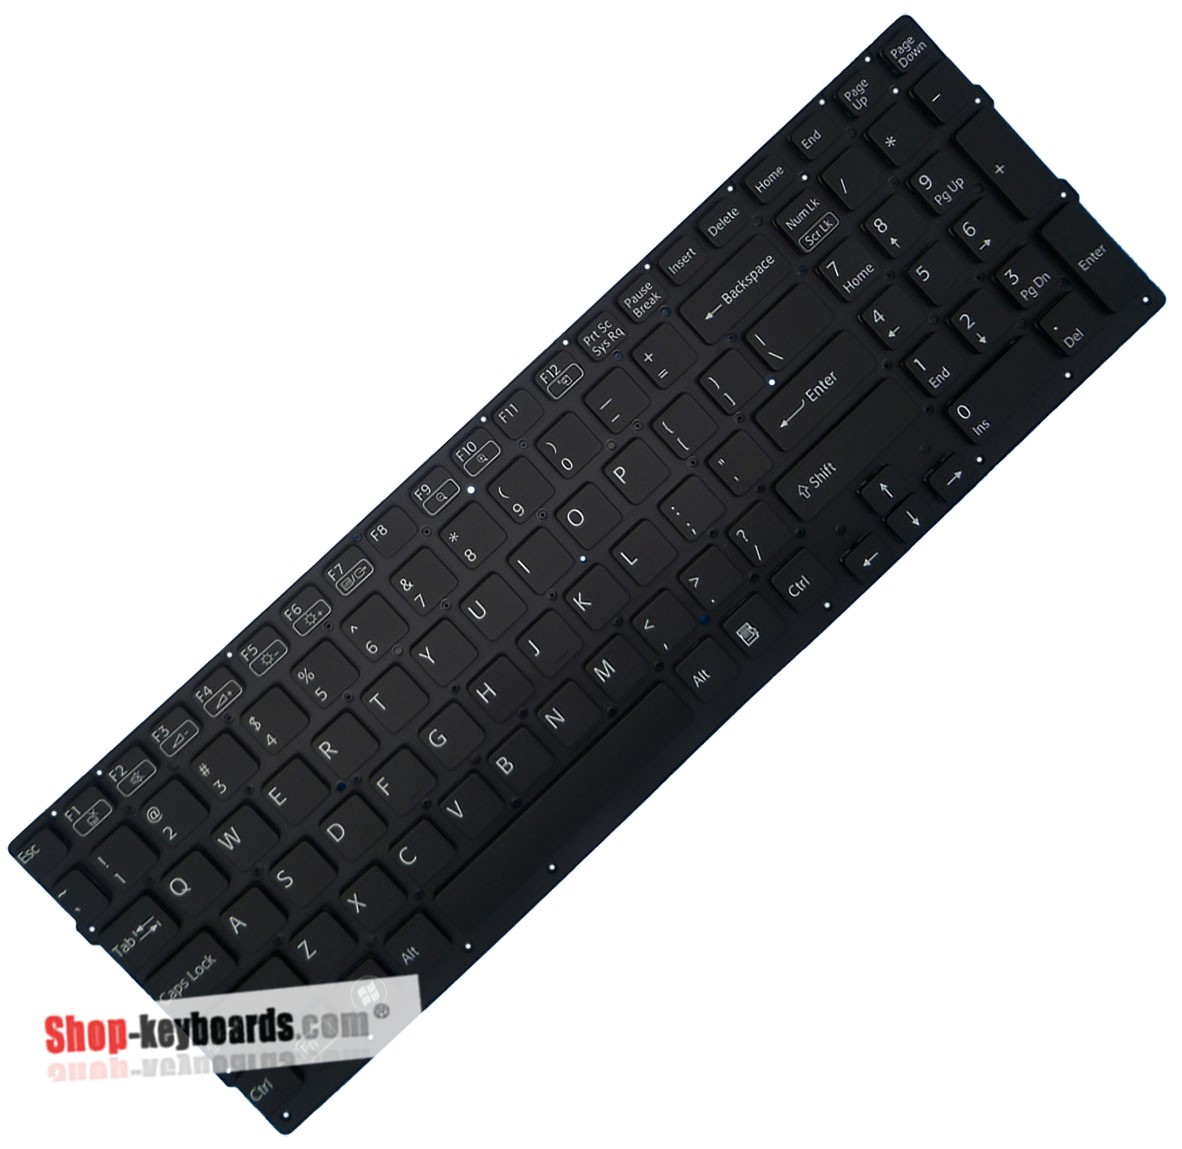 Sony VAIO VPC-CB4S5C Keyboard replacement